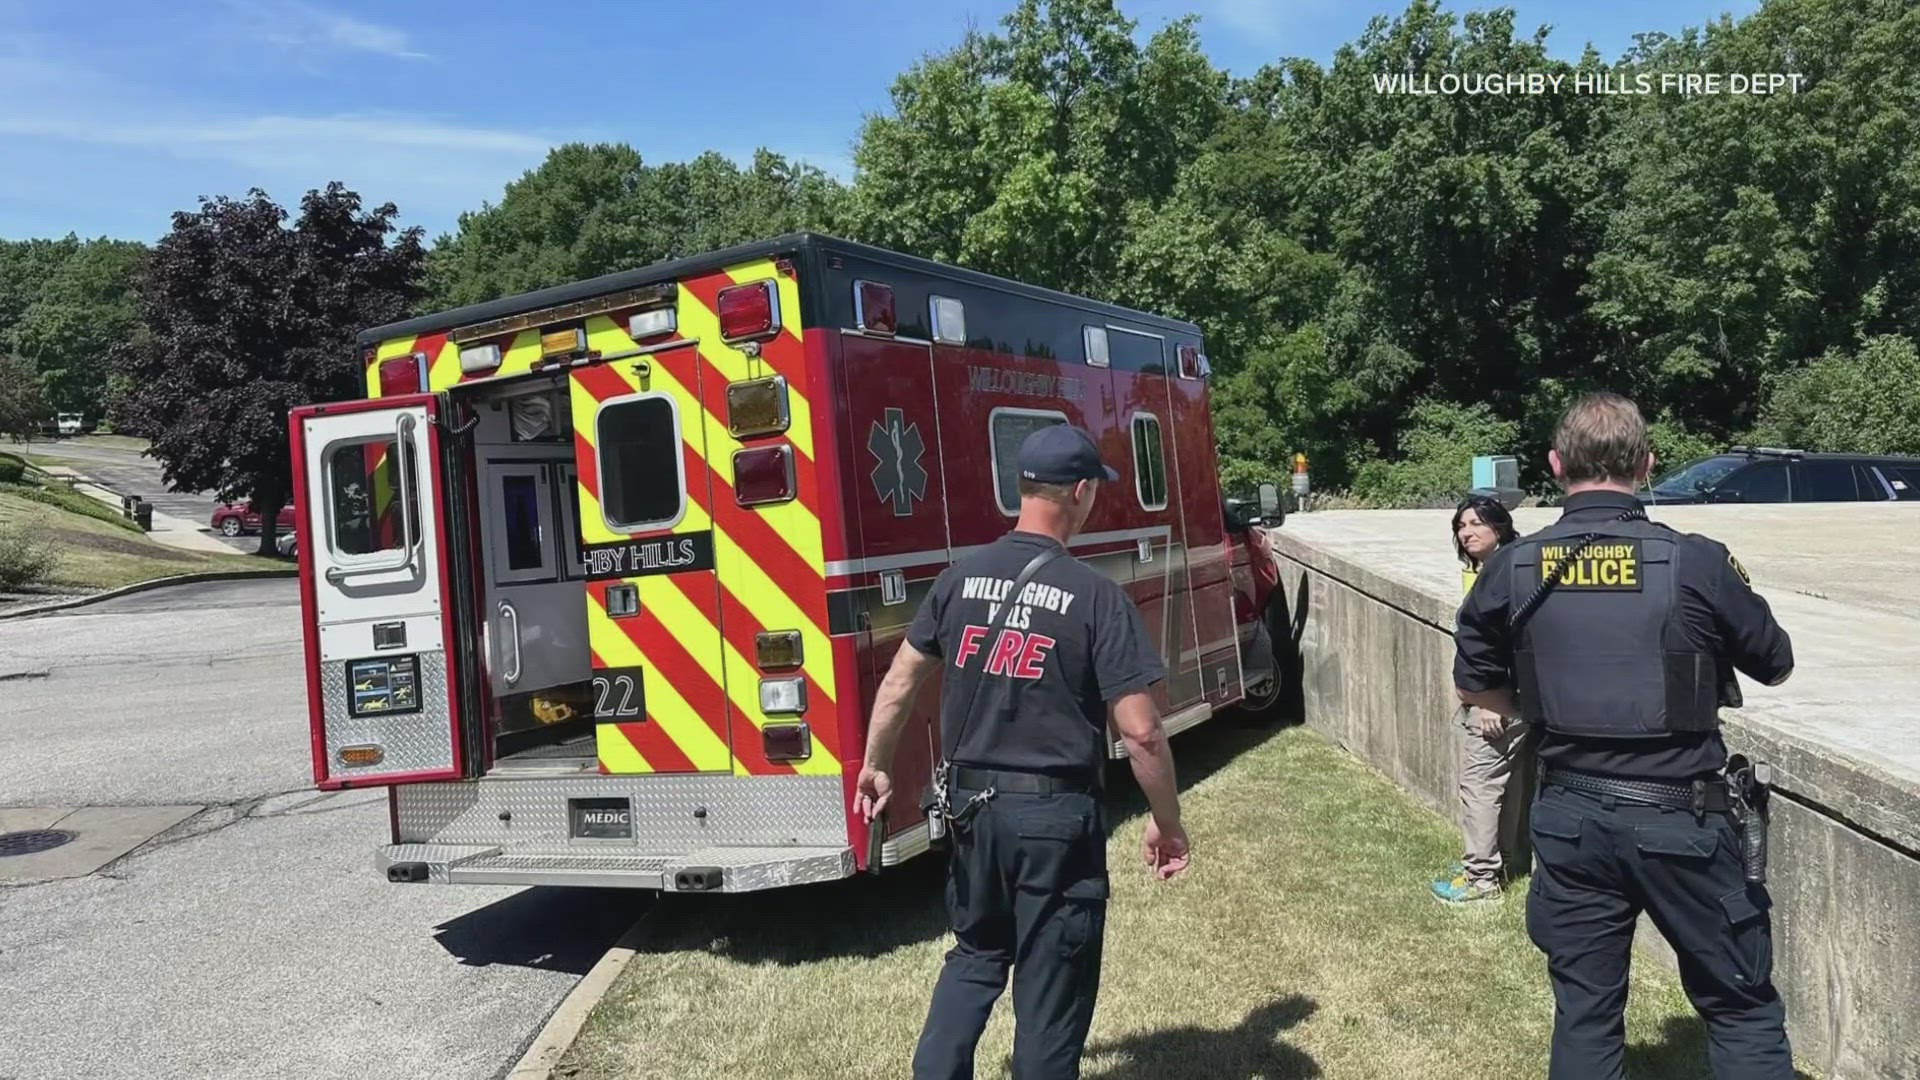 Willoughby Hills firefighter/paramedic Brian Paladino jumped into action on Sunday to prevent the theft of an ambulance.